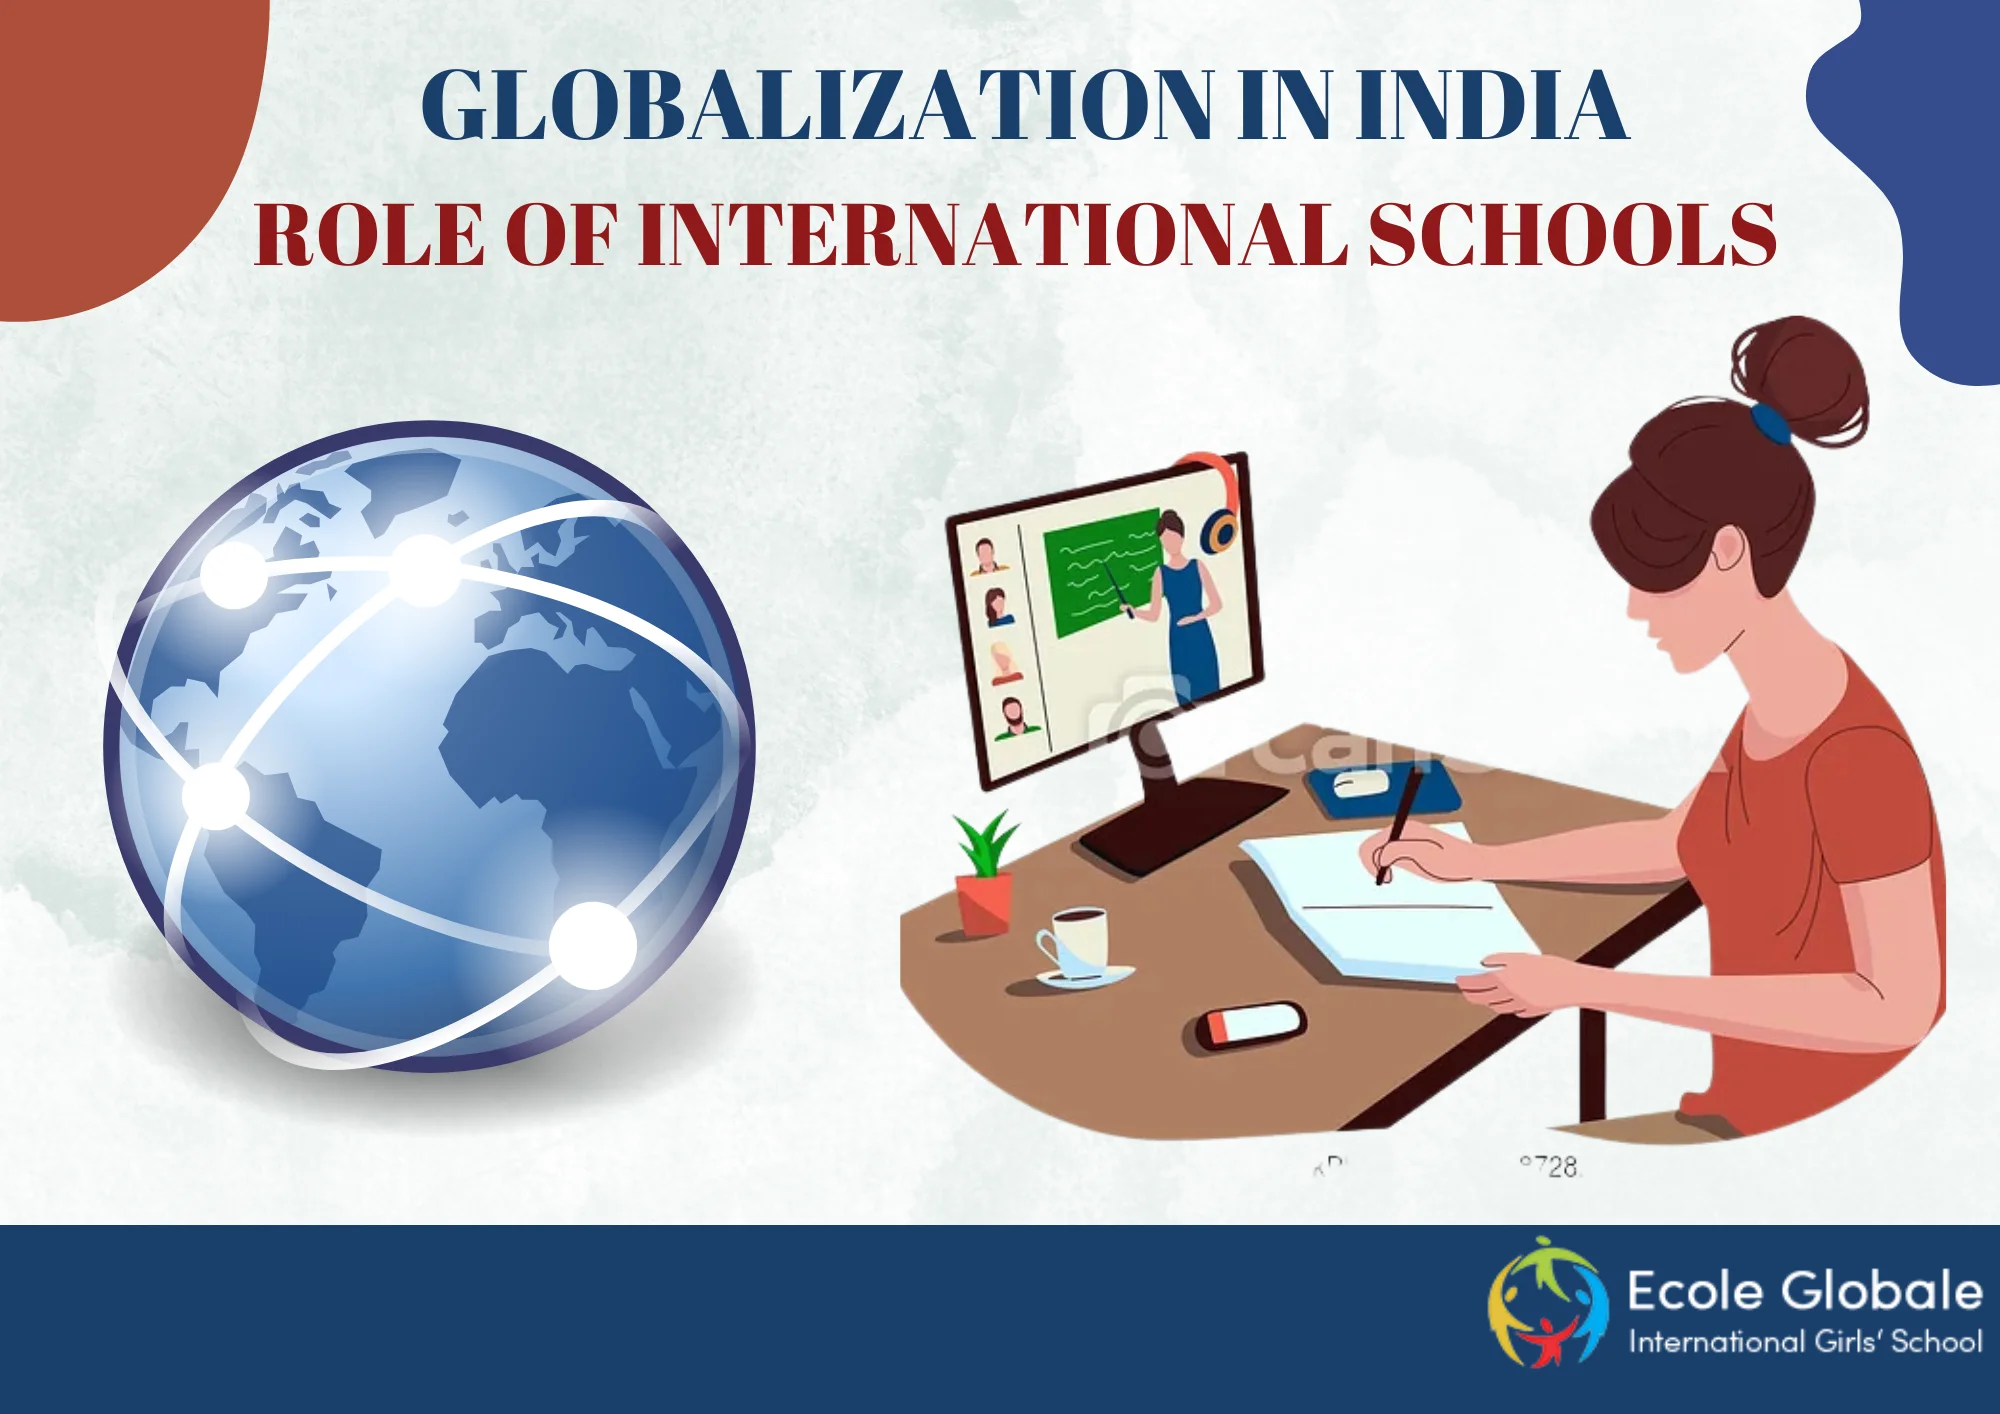 You are currently viewing The Role of International Schools in Globalization in India